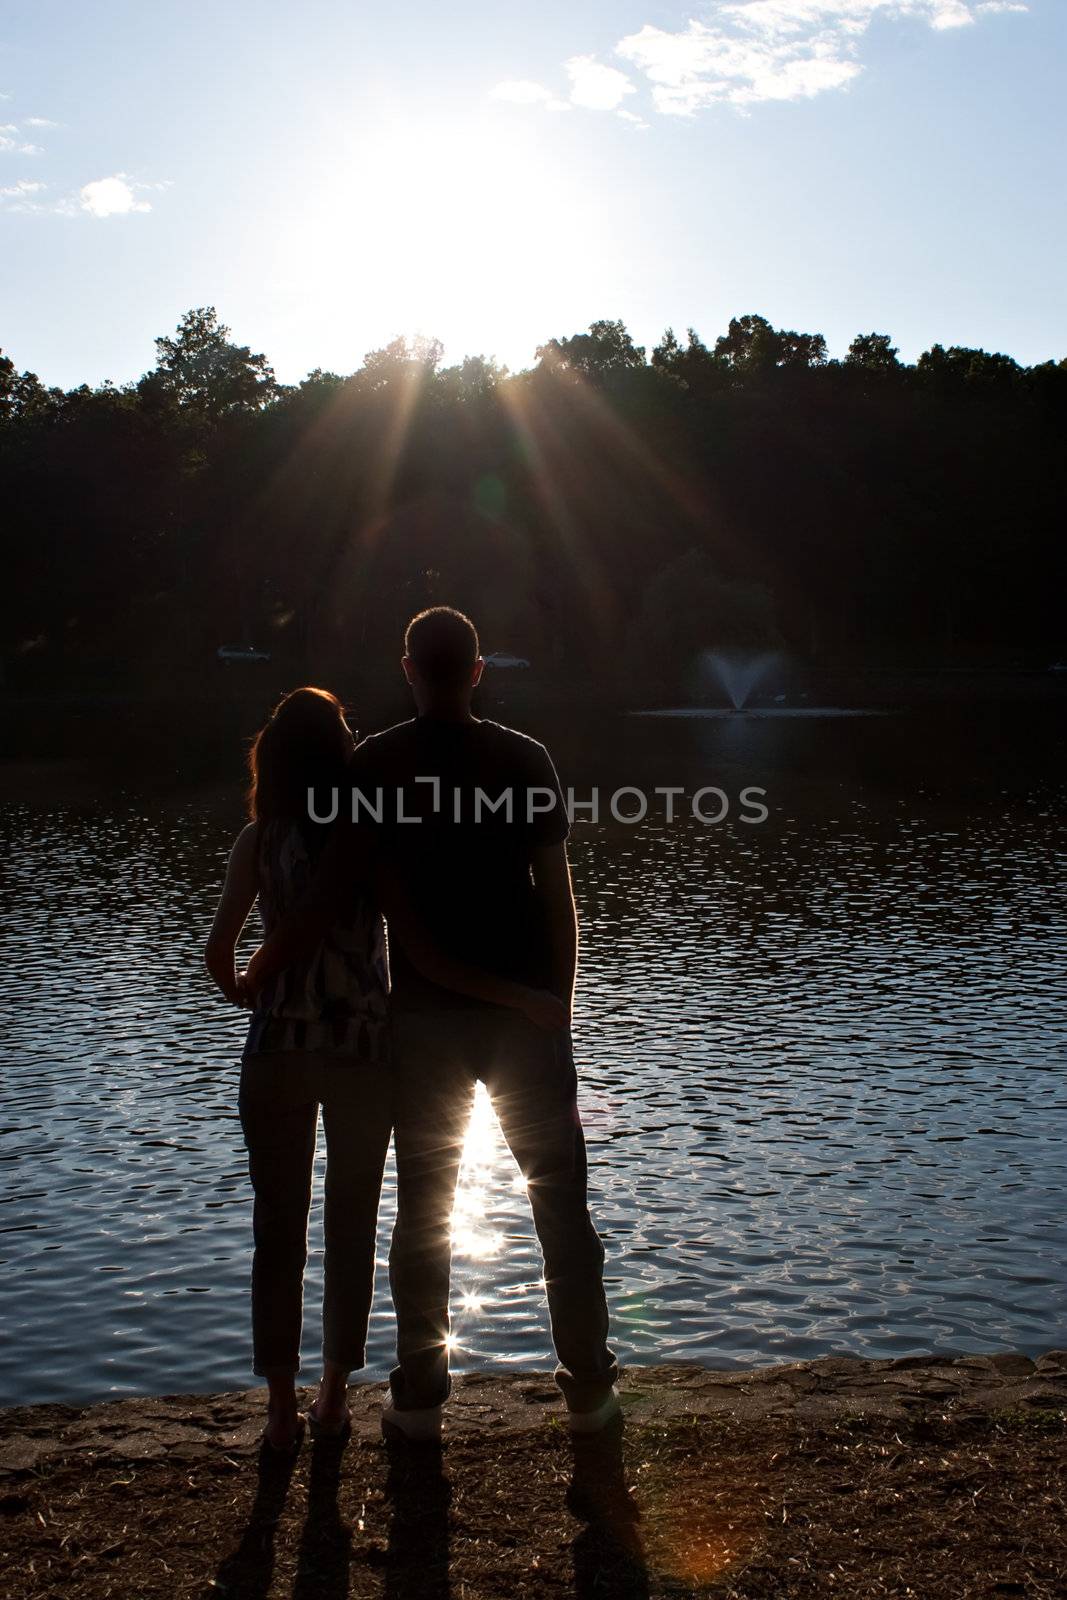 Silhouette of an affectionate couple embracing each other in the early evening hours with back lit lighting.